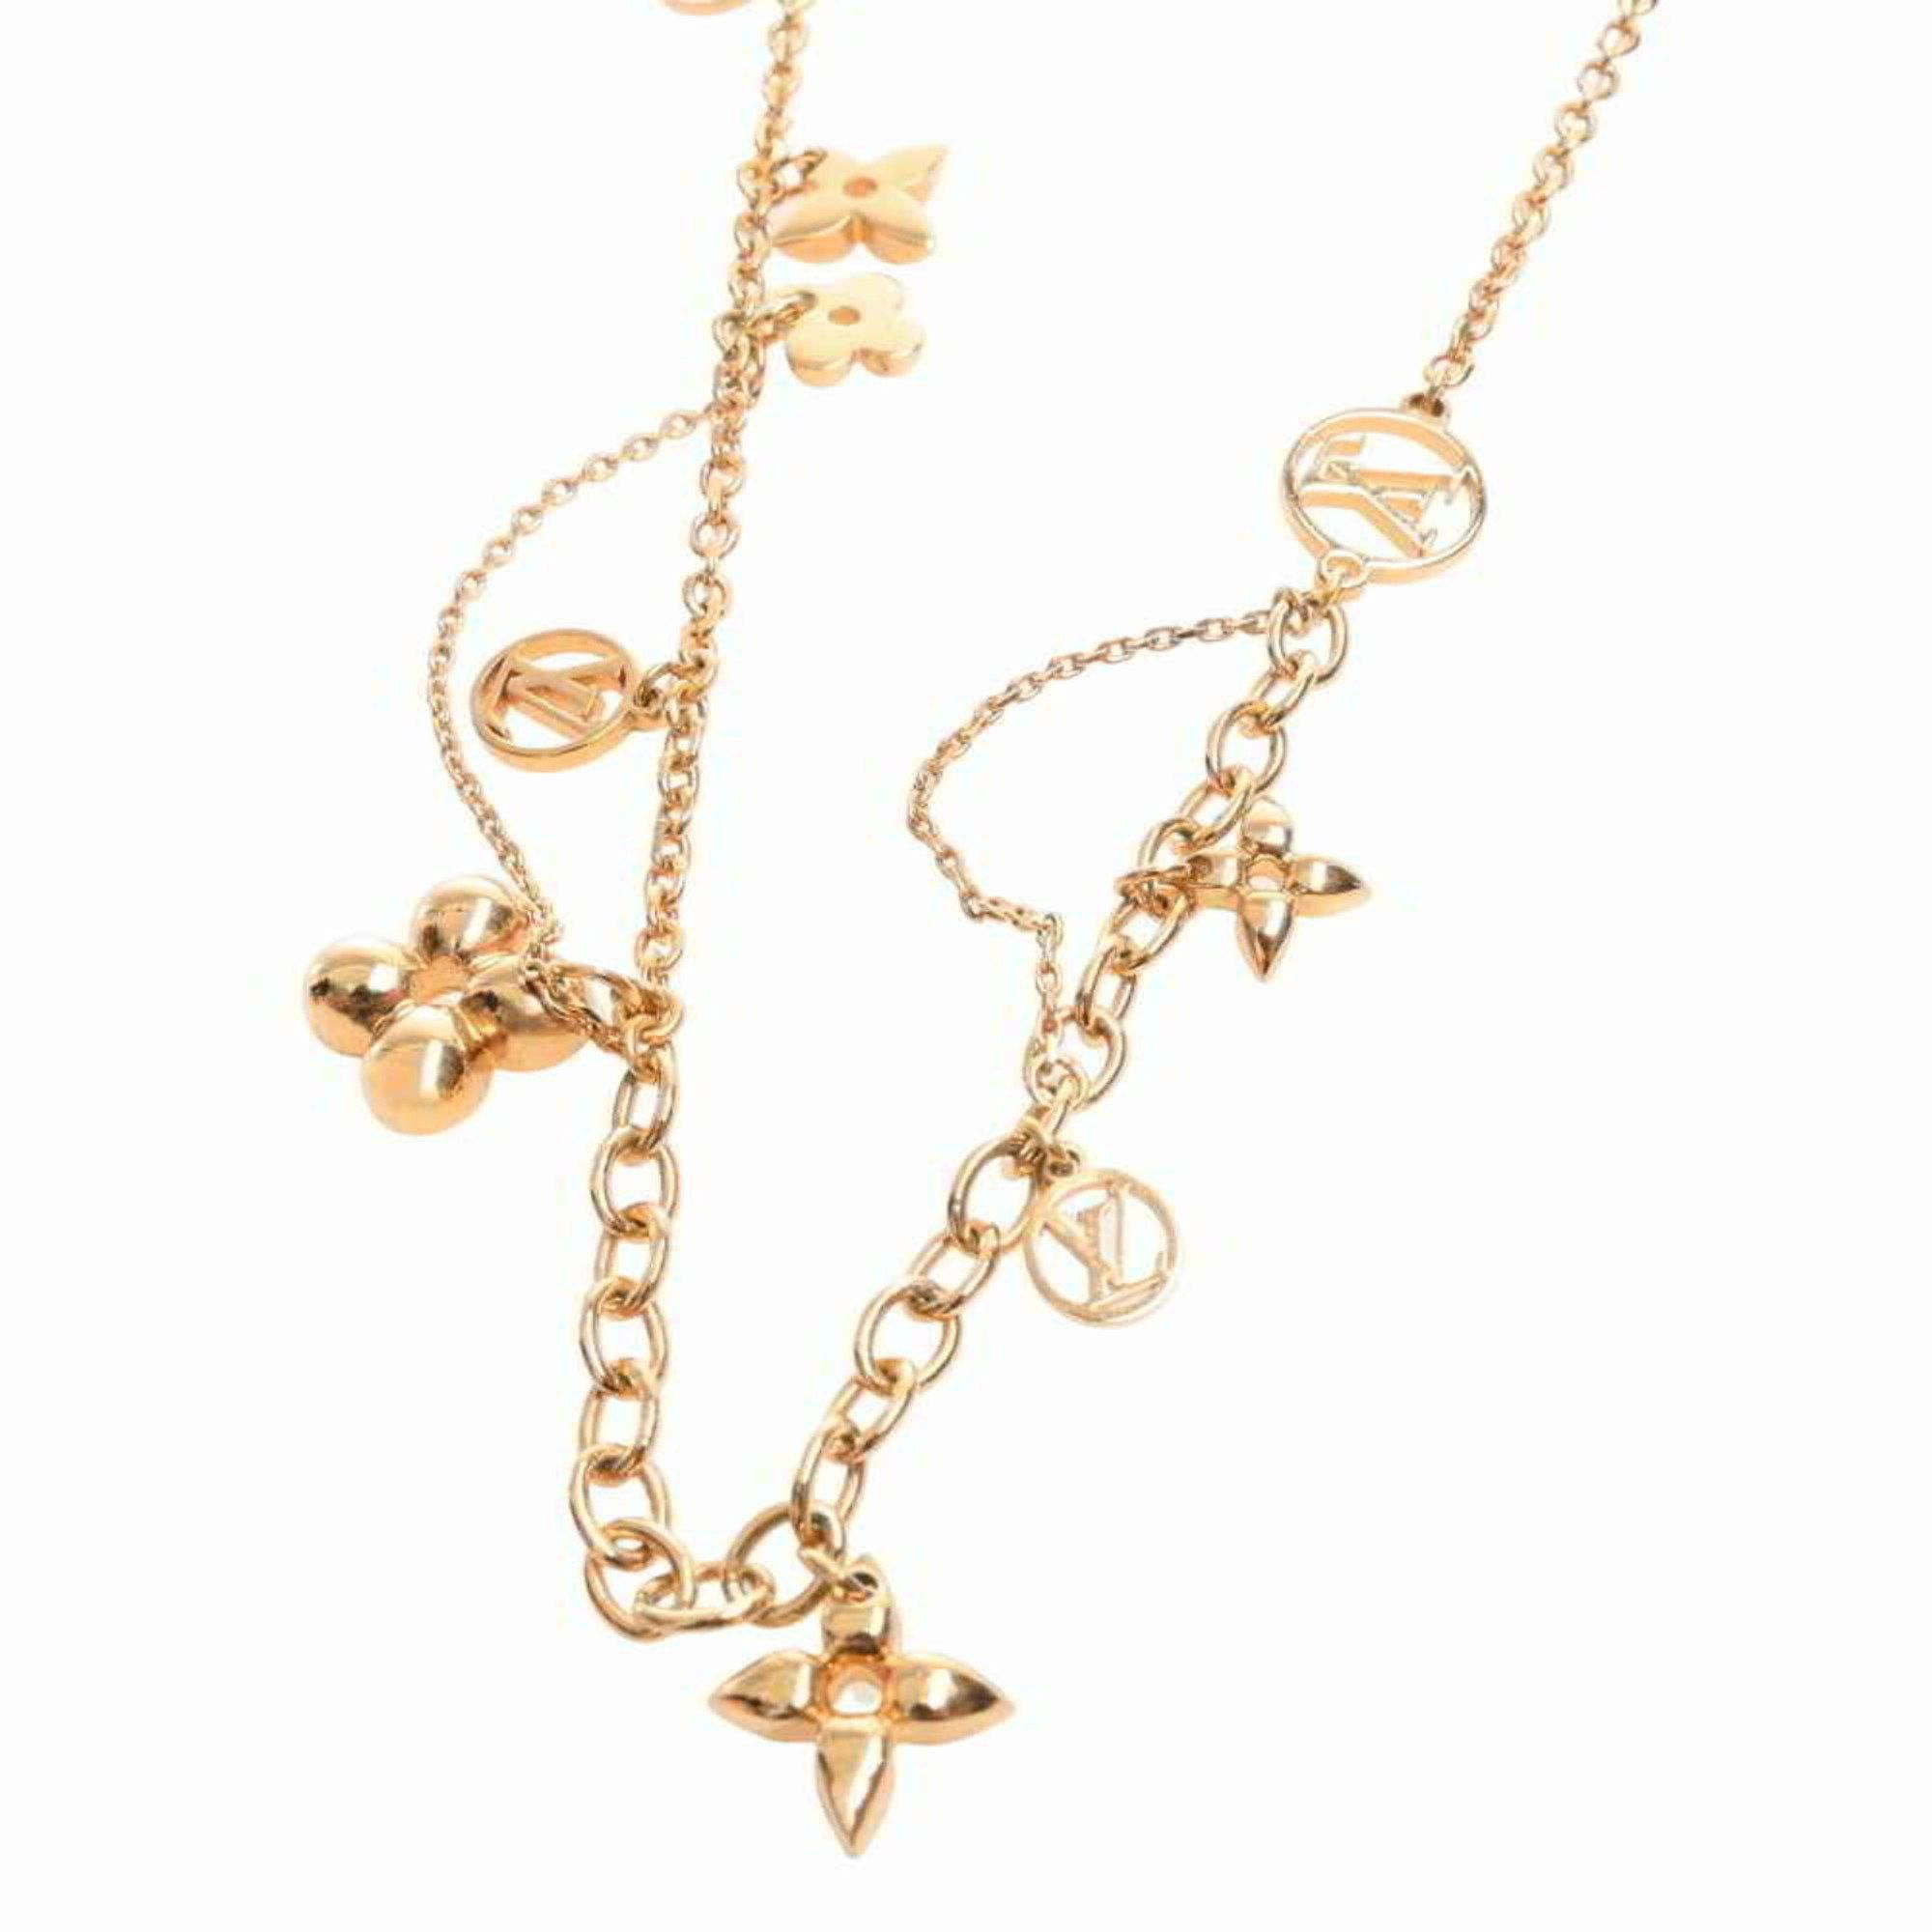 Louis Vuitton Collier Blooming Flower LV Circle Necklace Gold M64855 F/S